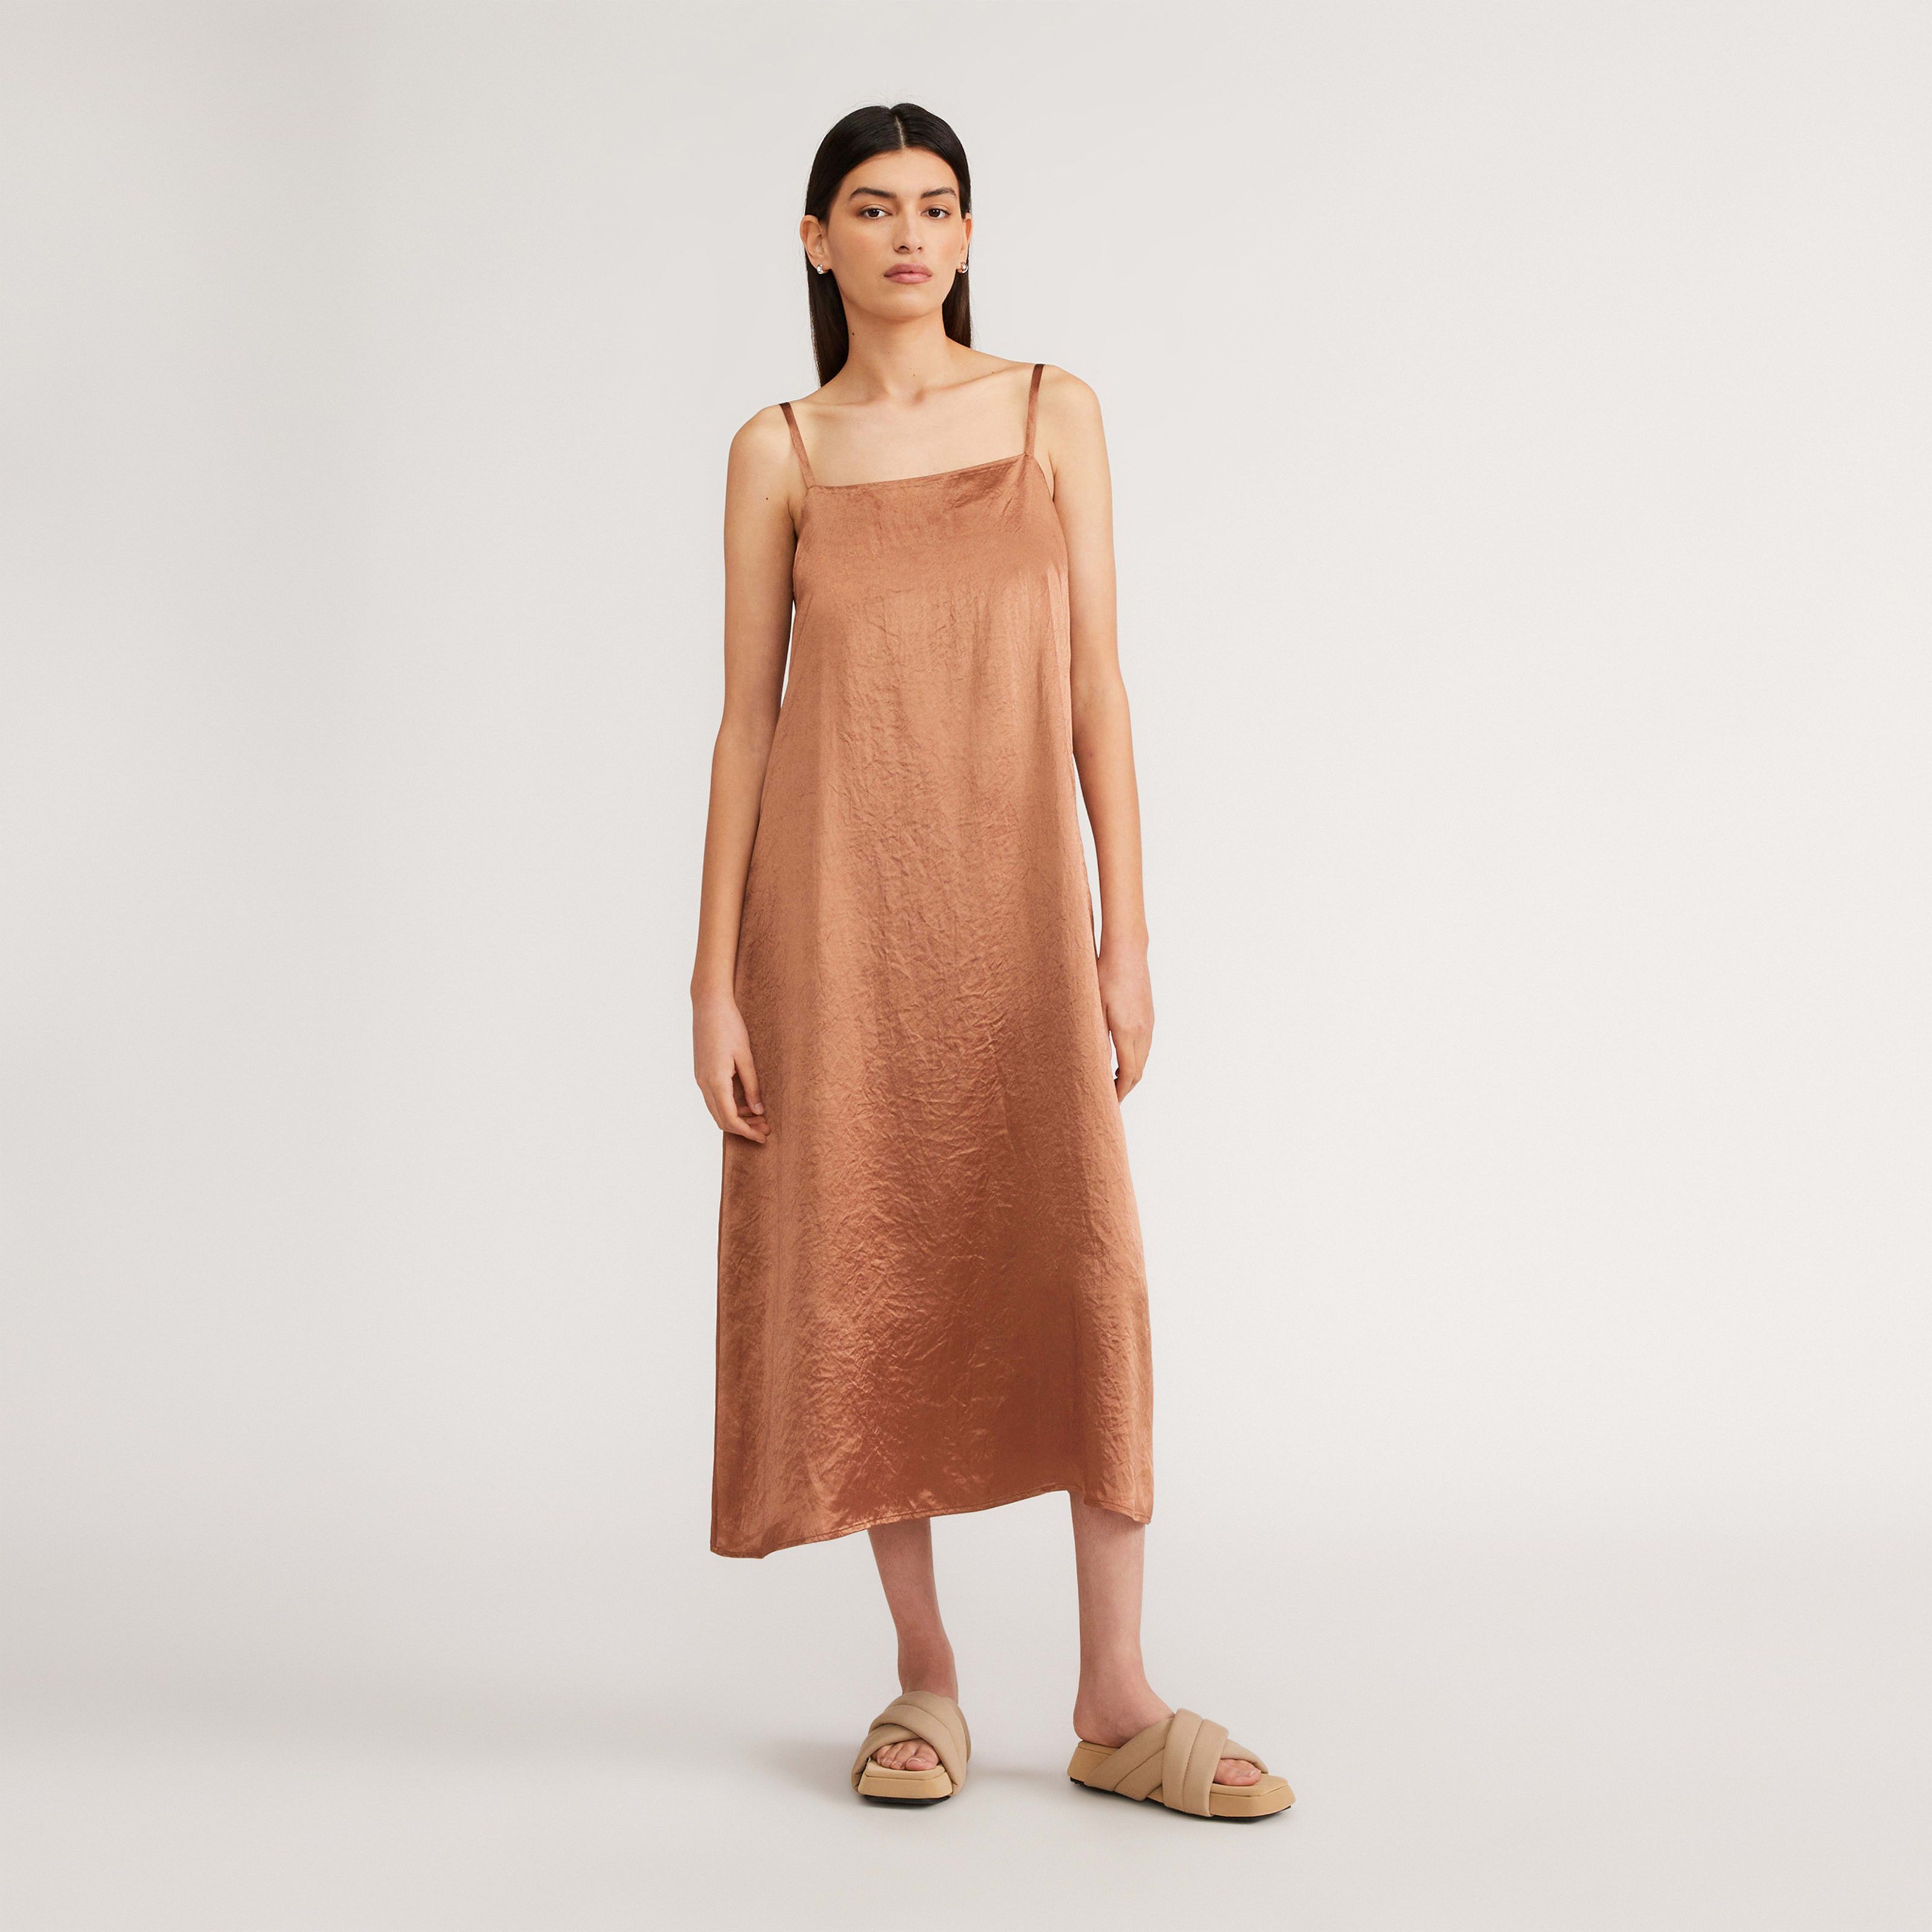 Women's Satin Square-Neck Slip Dress by Everlane in Brown Brown, Size 12 | Everlane